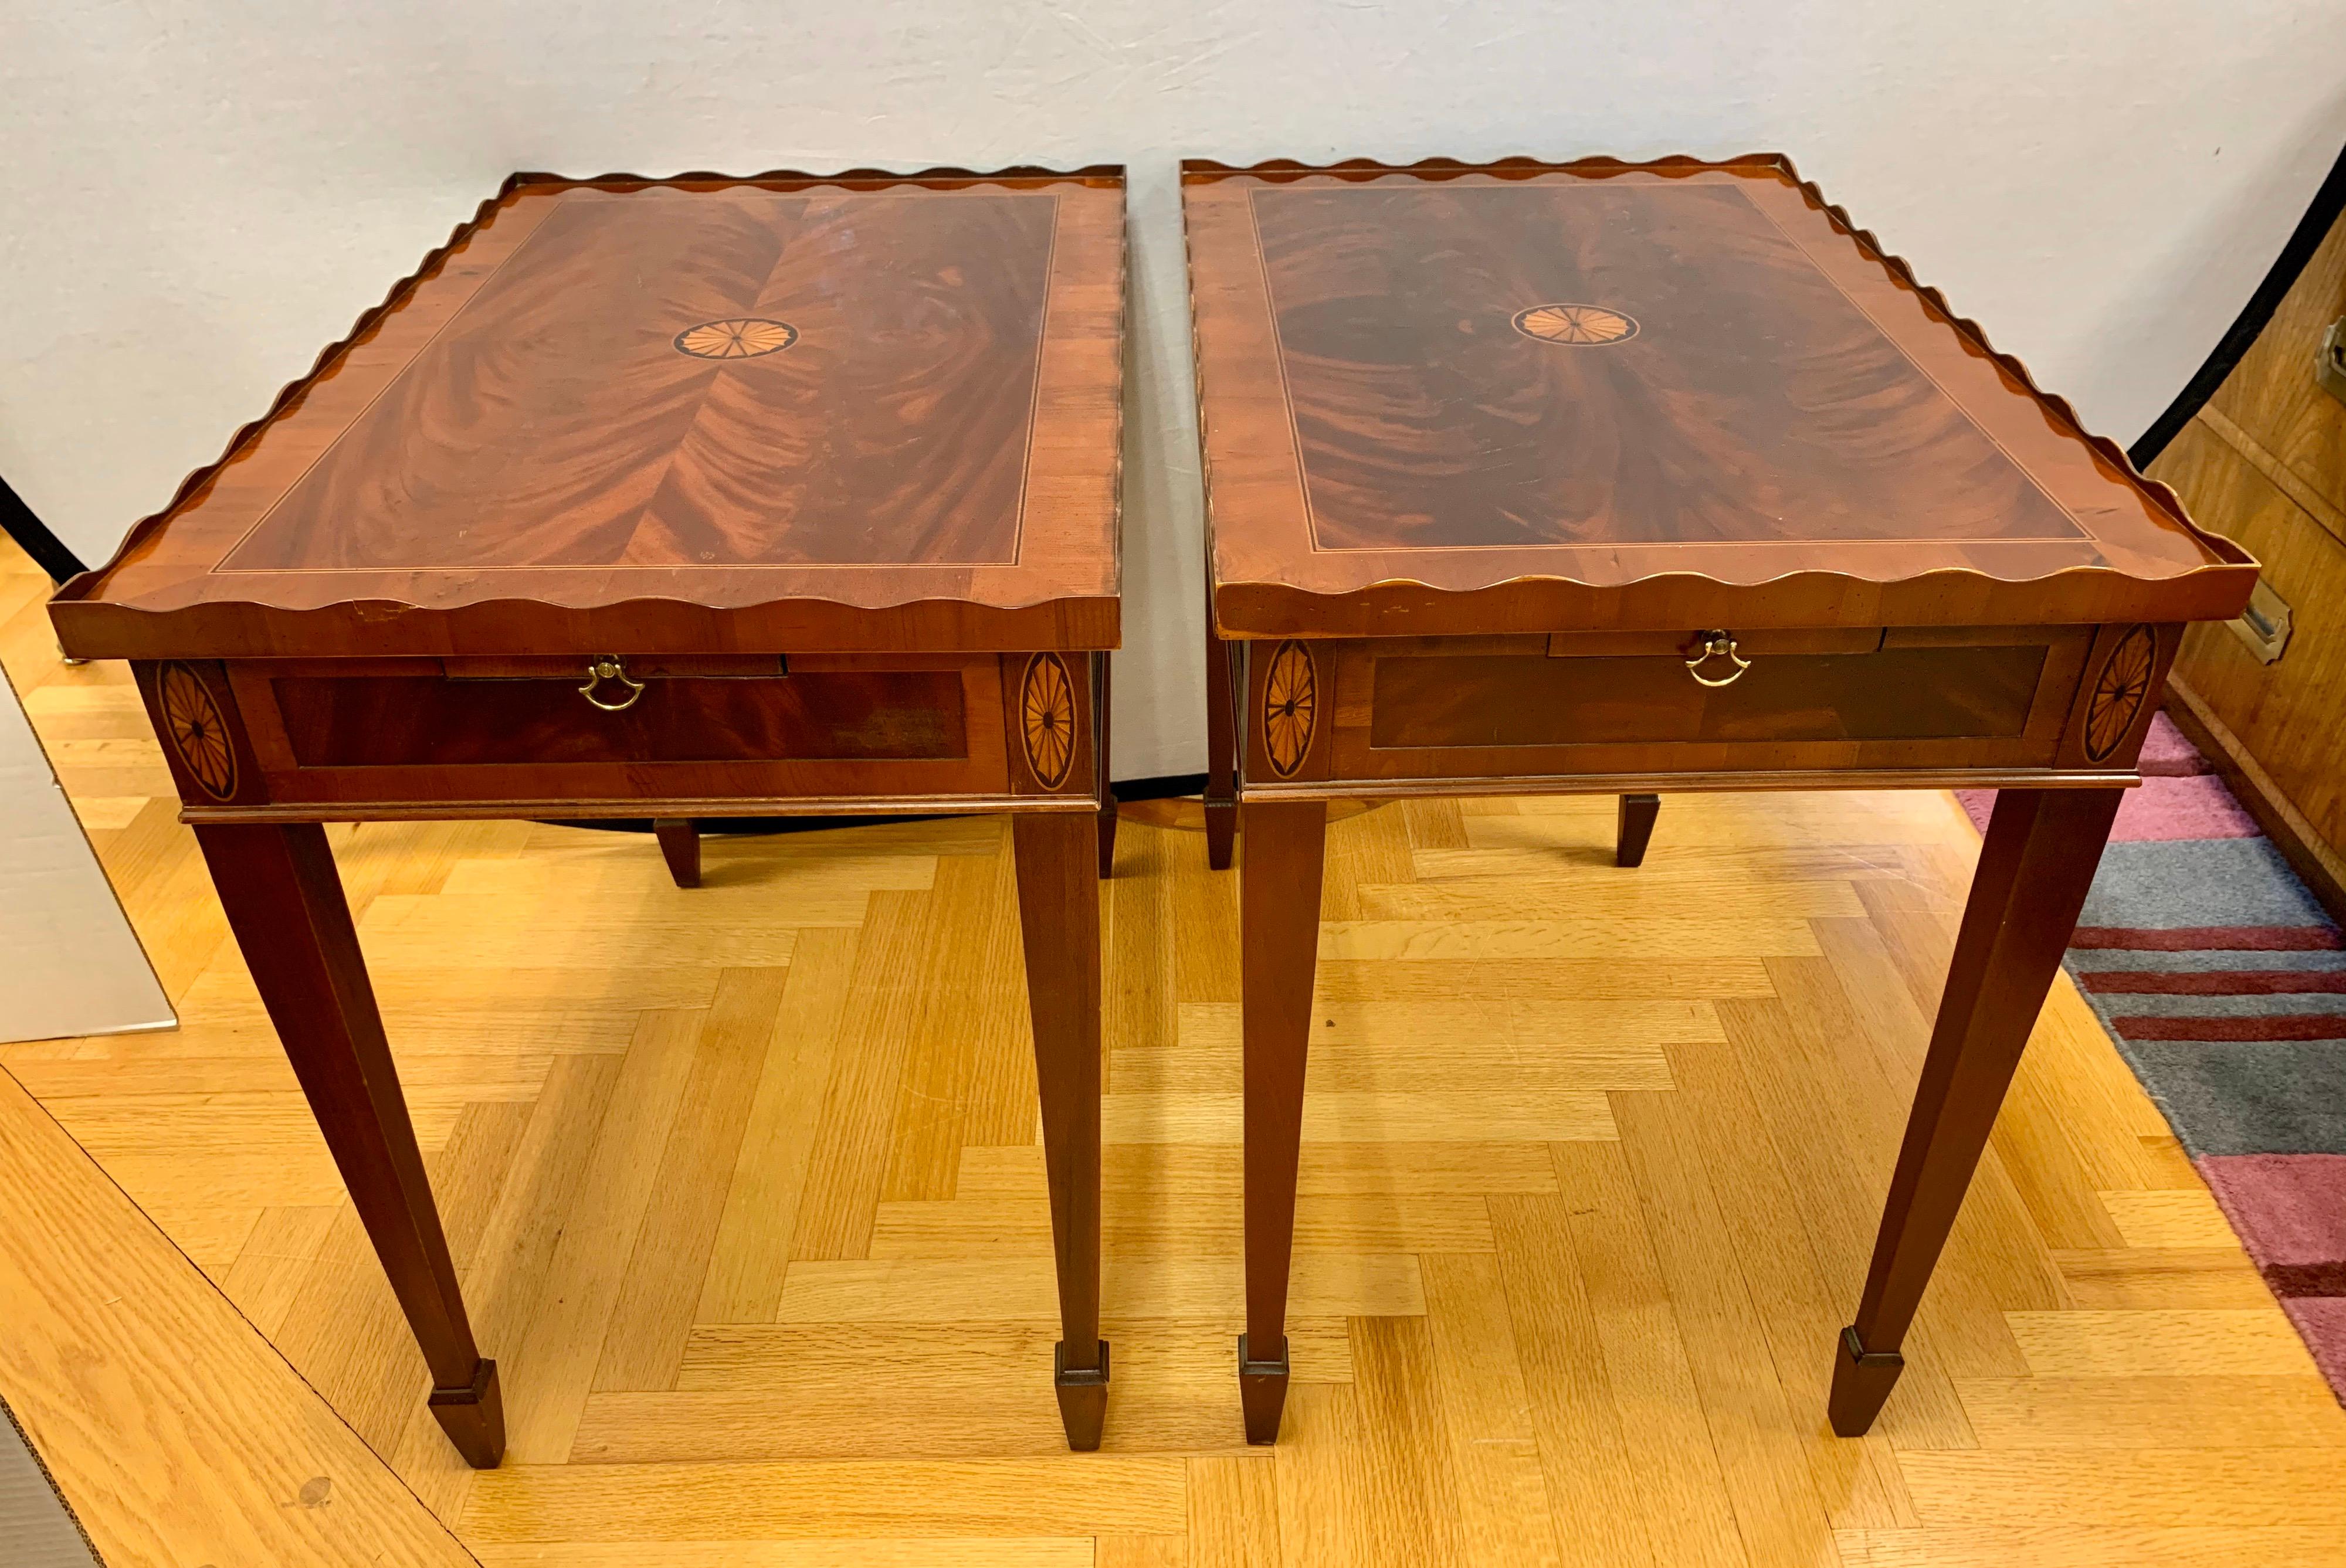 Elegant pair of matching mahogany inlay occasional tables with tapered legs, rimmed top and magnificent inlay. Designed and manufactured by Hekman Furniture, in the USA. They are showstoppers.